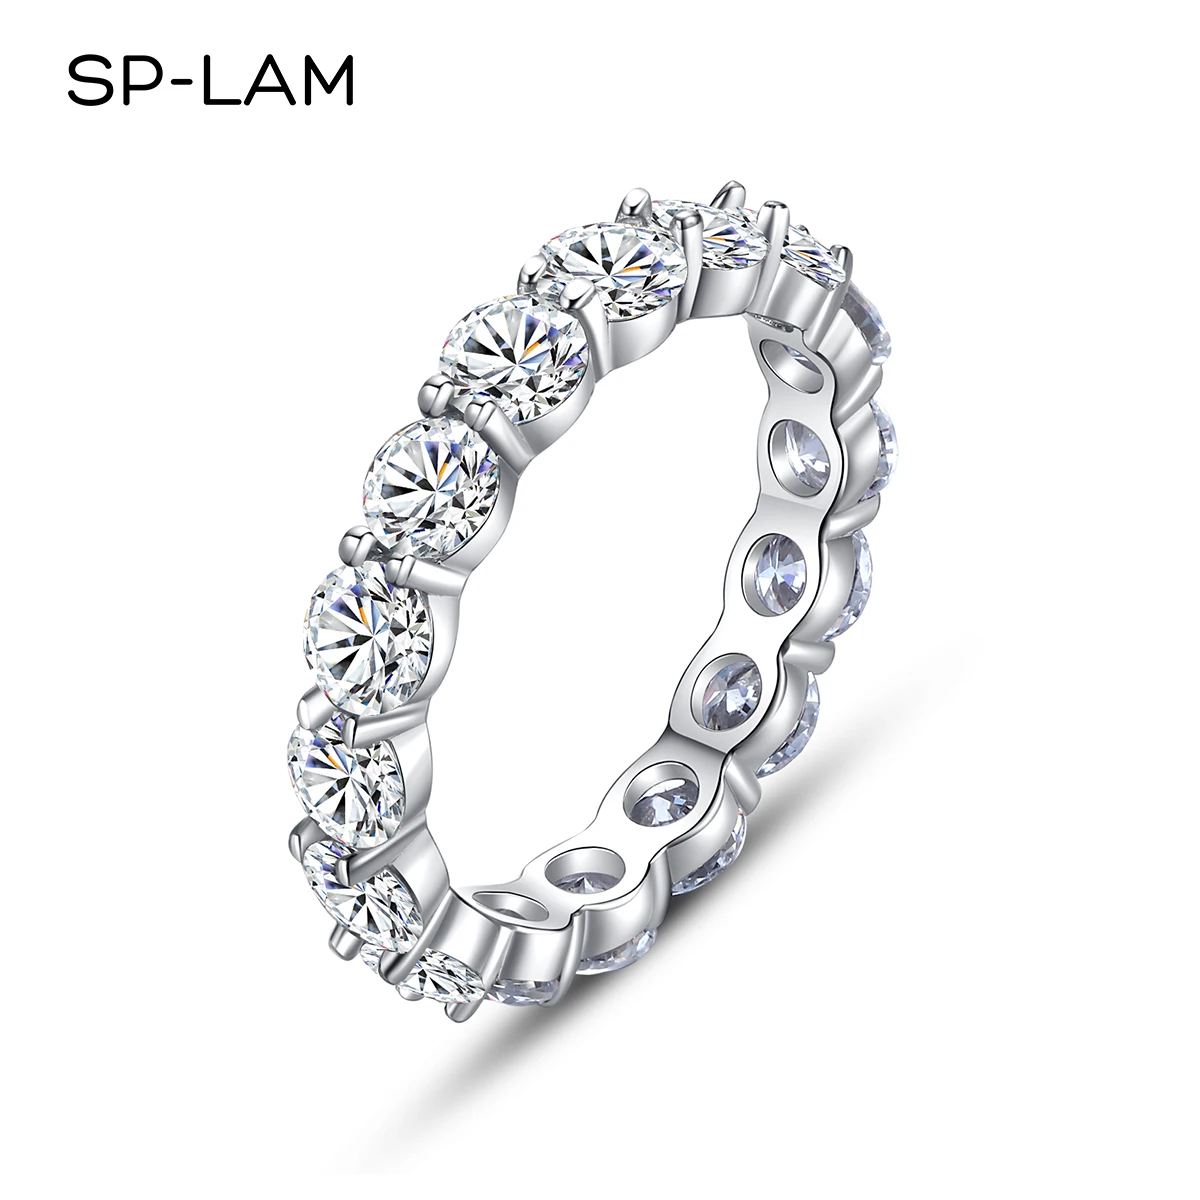 4mm Round D Moissanite Wedding Band Rings for Women 925 Sterling Silver Stackable Stylish Engagement Anniversary Matching Ring